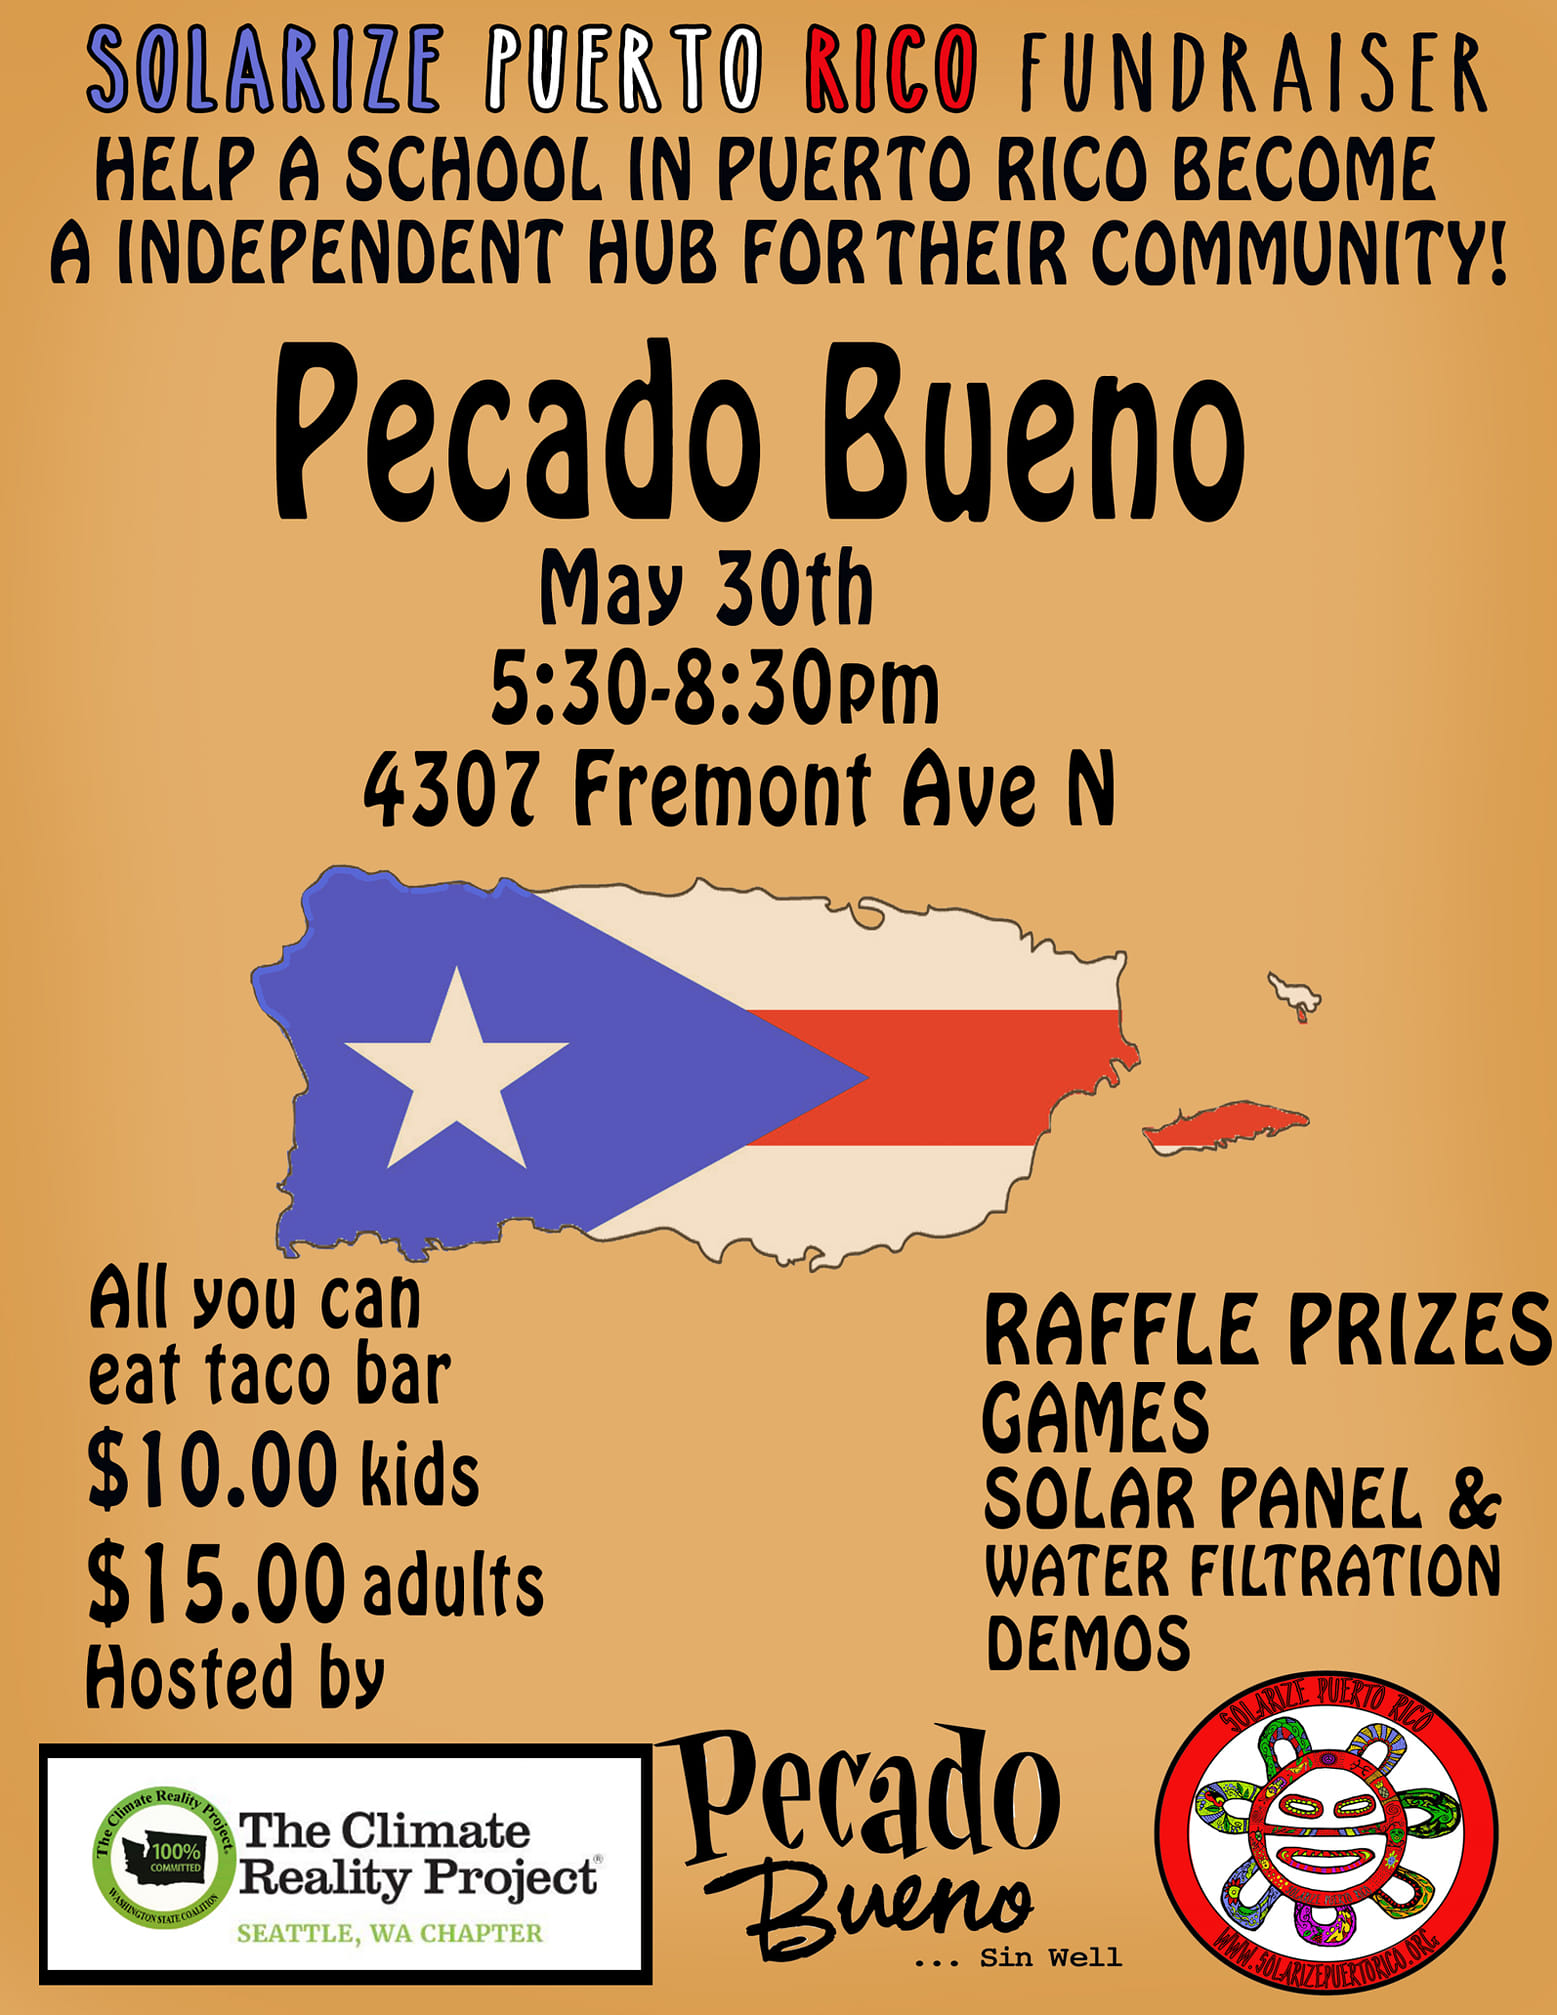 Solarize Puerto Rico Fundraiser at Pecado Bueno May 30th, 5:30pm-8:30pm. Hosted by Climate Reality Project Seattle Chapter